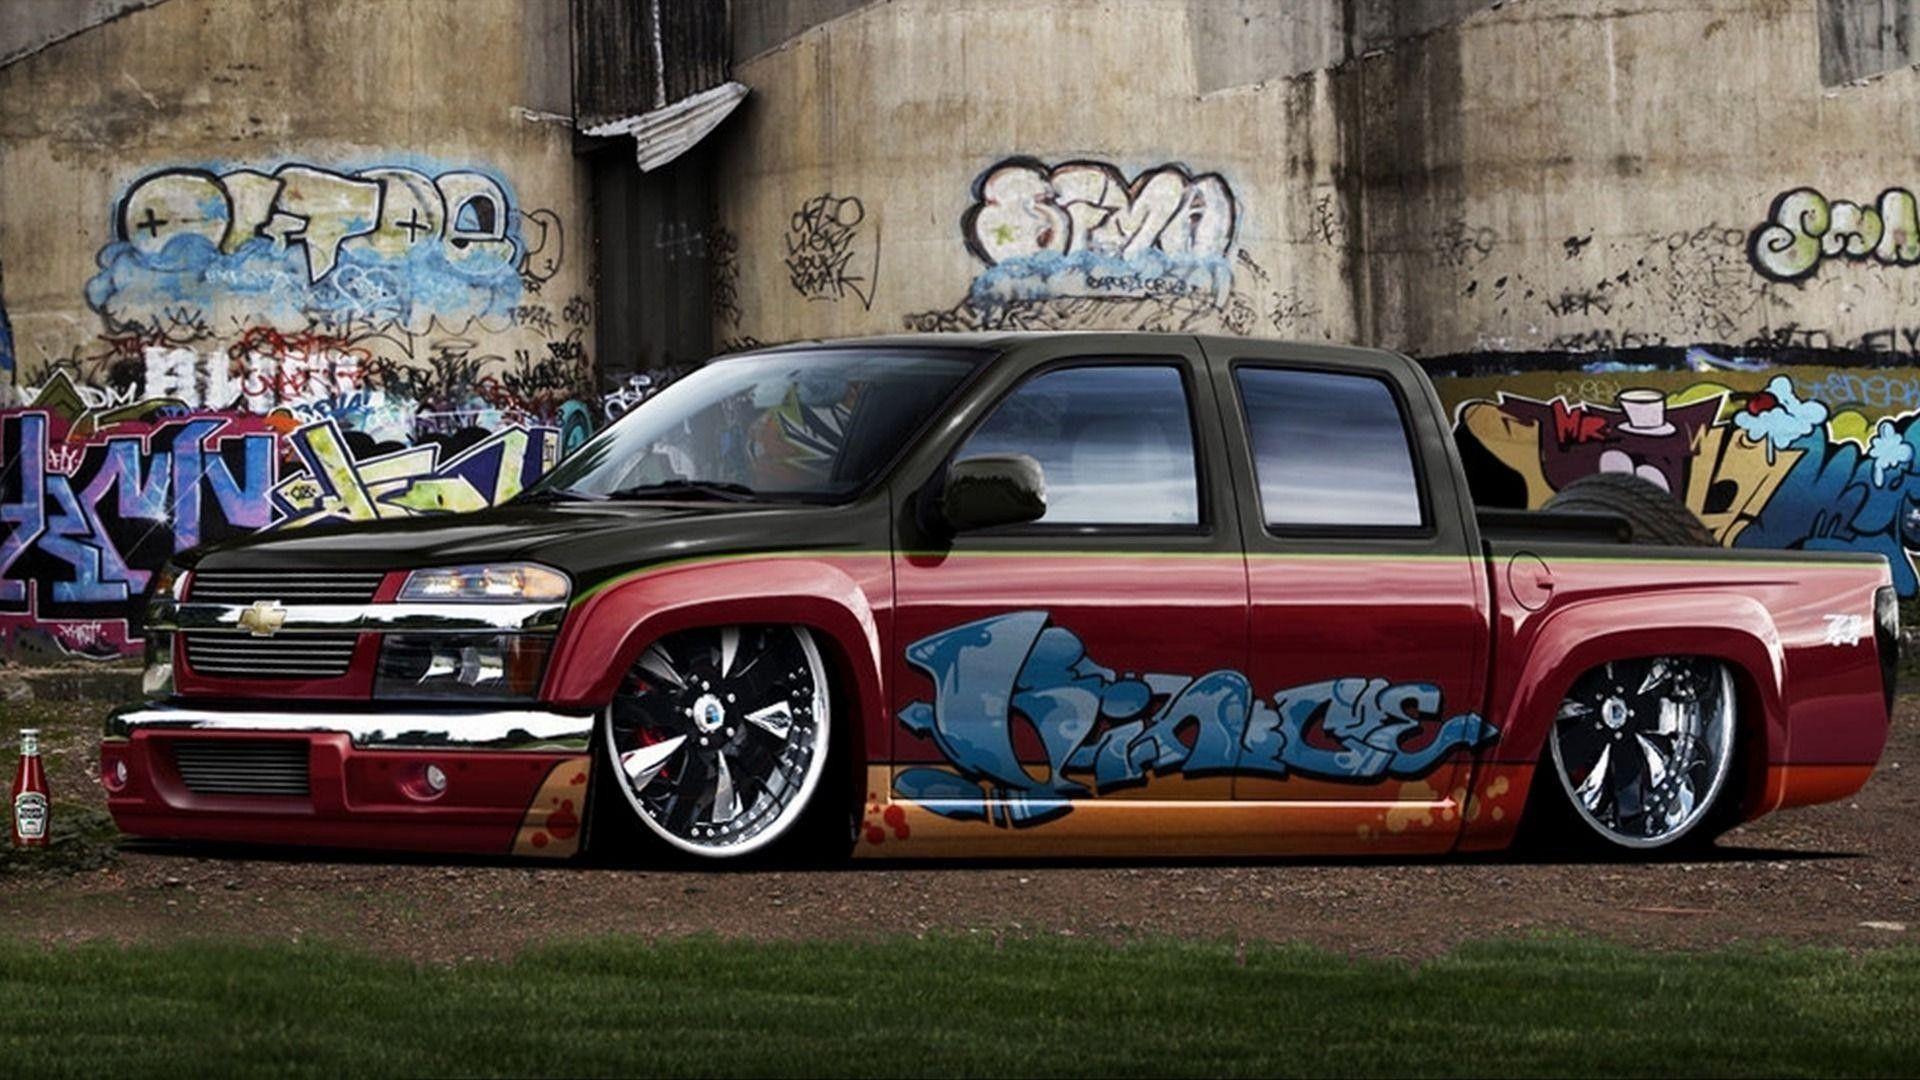 Chevy Trucks Wallpaper. Gallery Of Cars Chevrolet Roads Vehicles